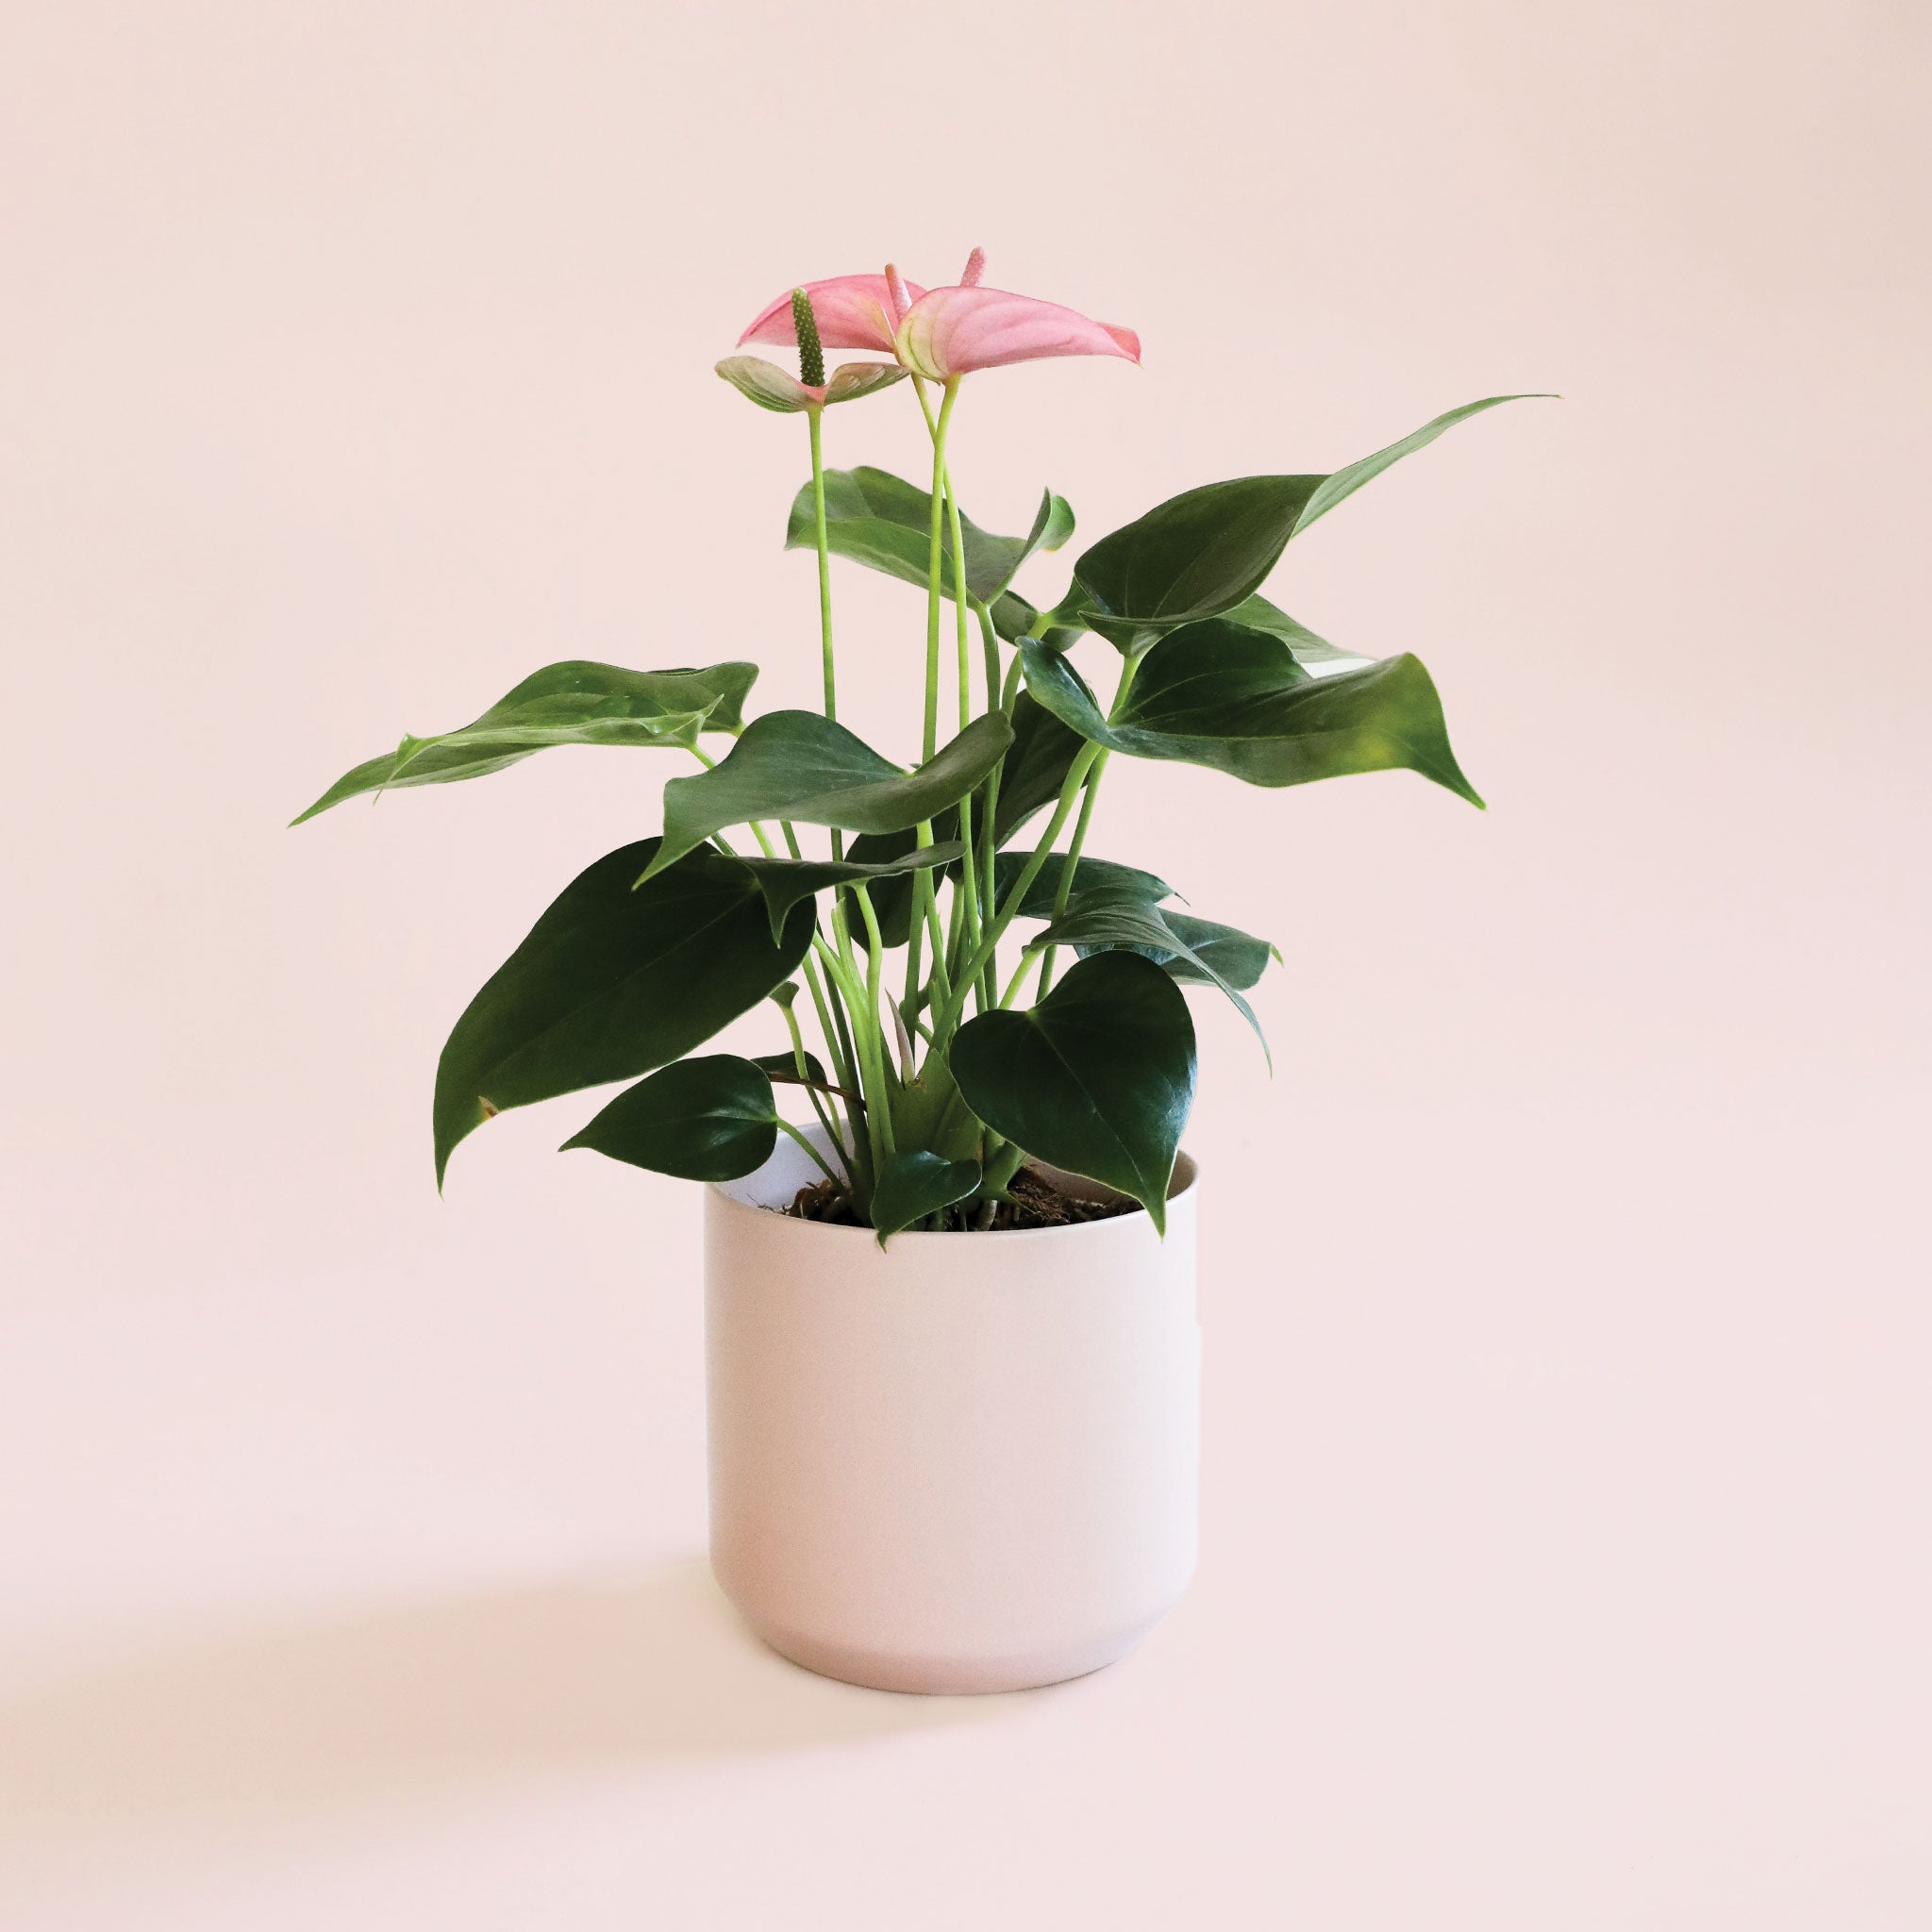 an anthurium sweet dreams with bright green leaves and hot pink flowers sits in a light pink pot